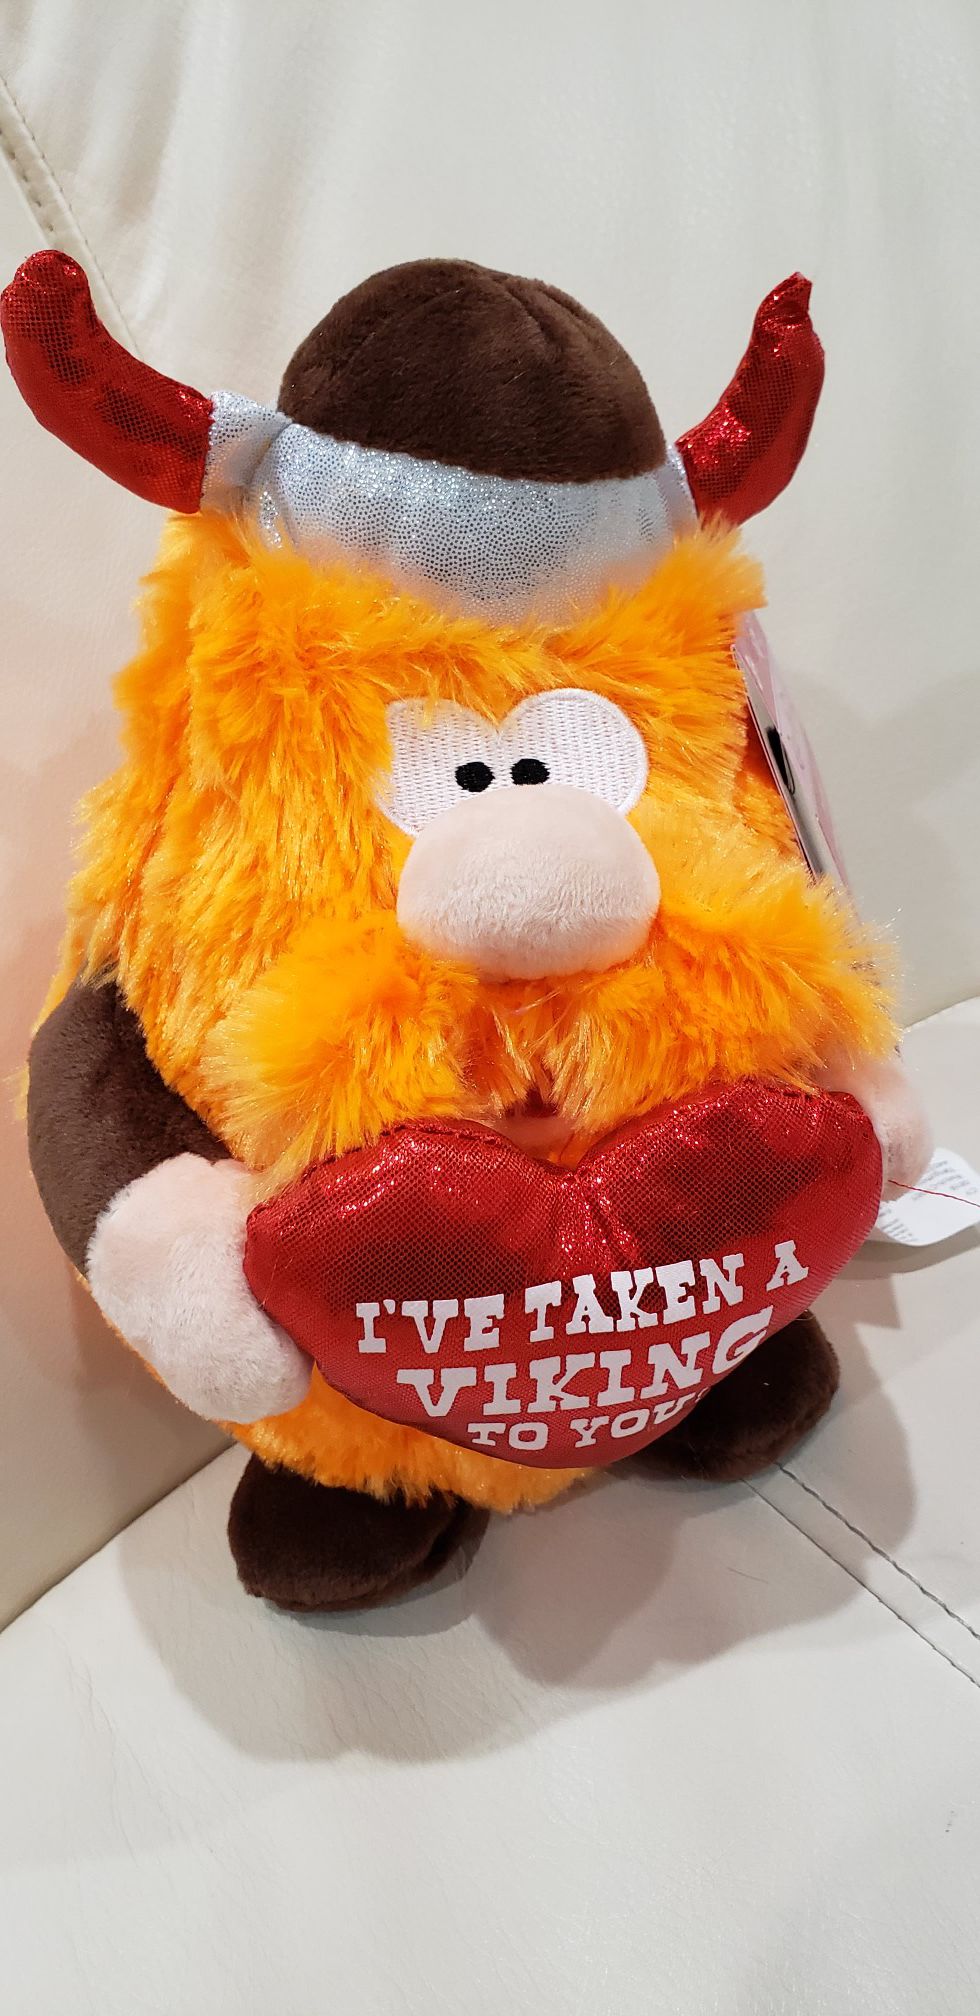 Viking Valentine's day stuffed animal. Sings "I'm too sexy for my shirt" song and the cheeks light